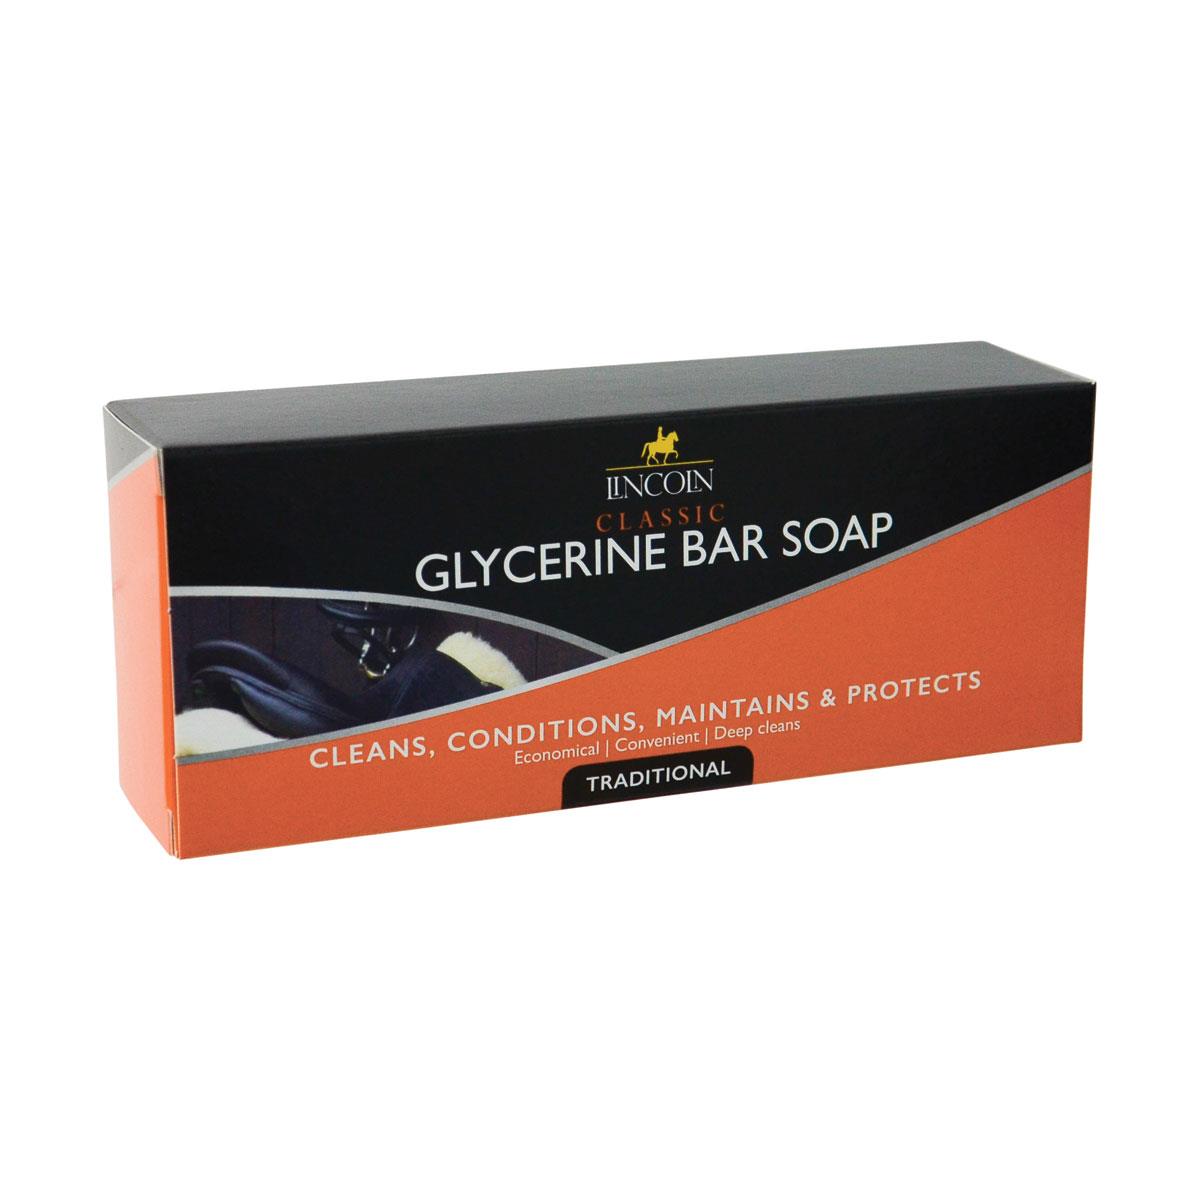 Lincoln Classic Glycerine Bar Soap - Just Horse Riders